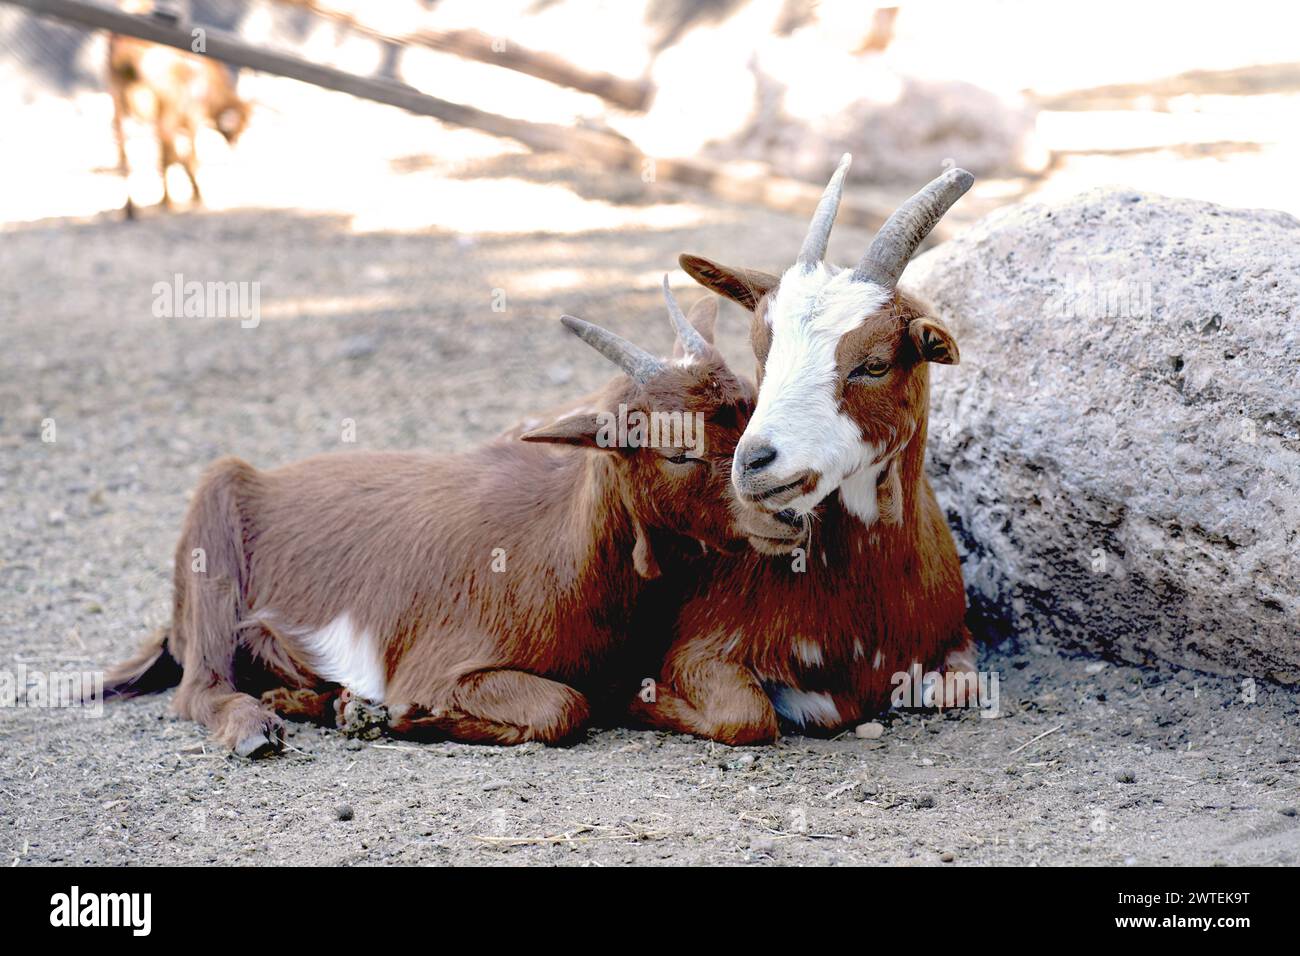 two young goats huddled together showing affection, one with its head resting on the back of the other, and lying on the earthen floor Stock Photo